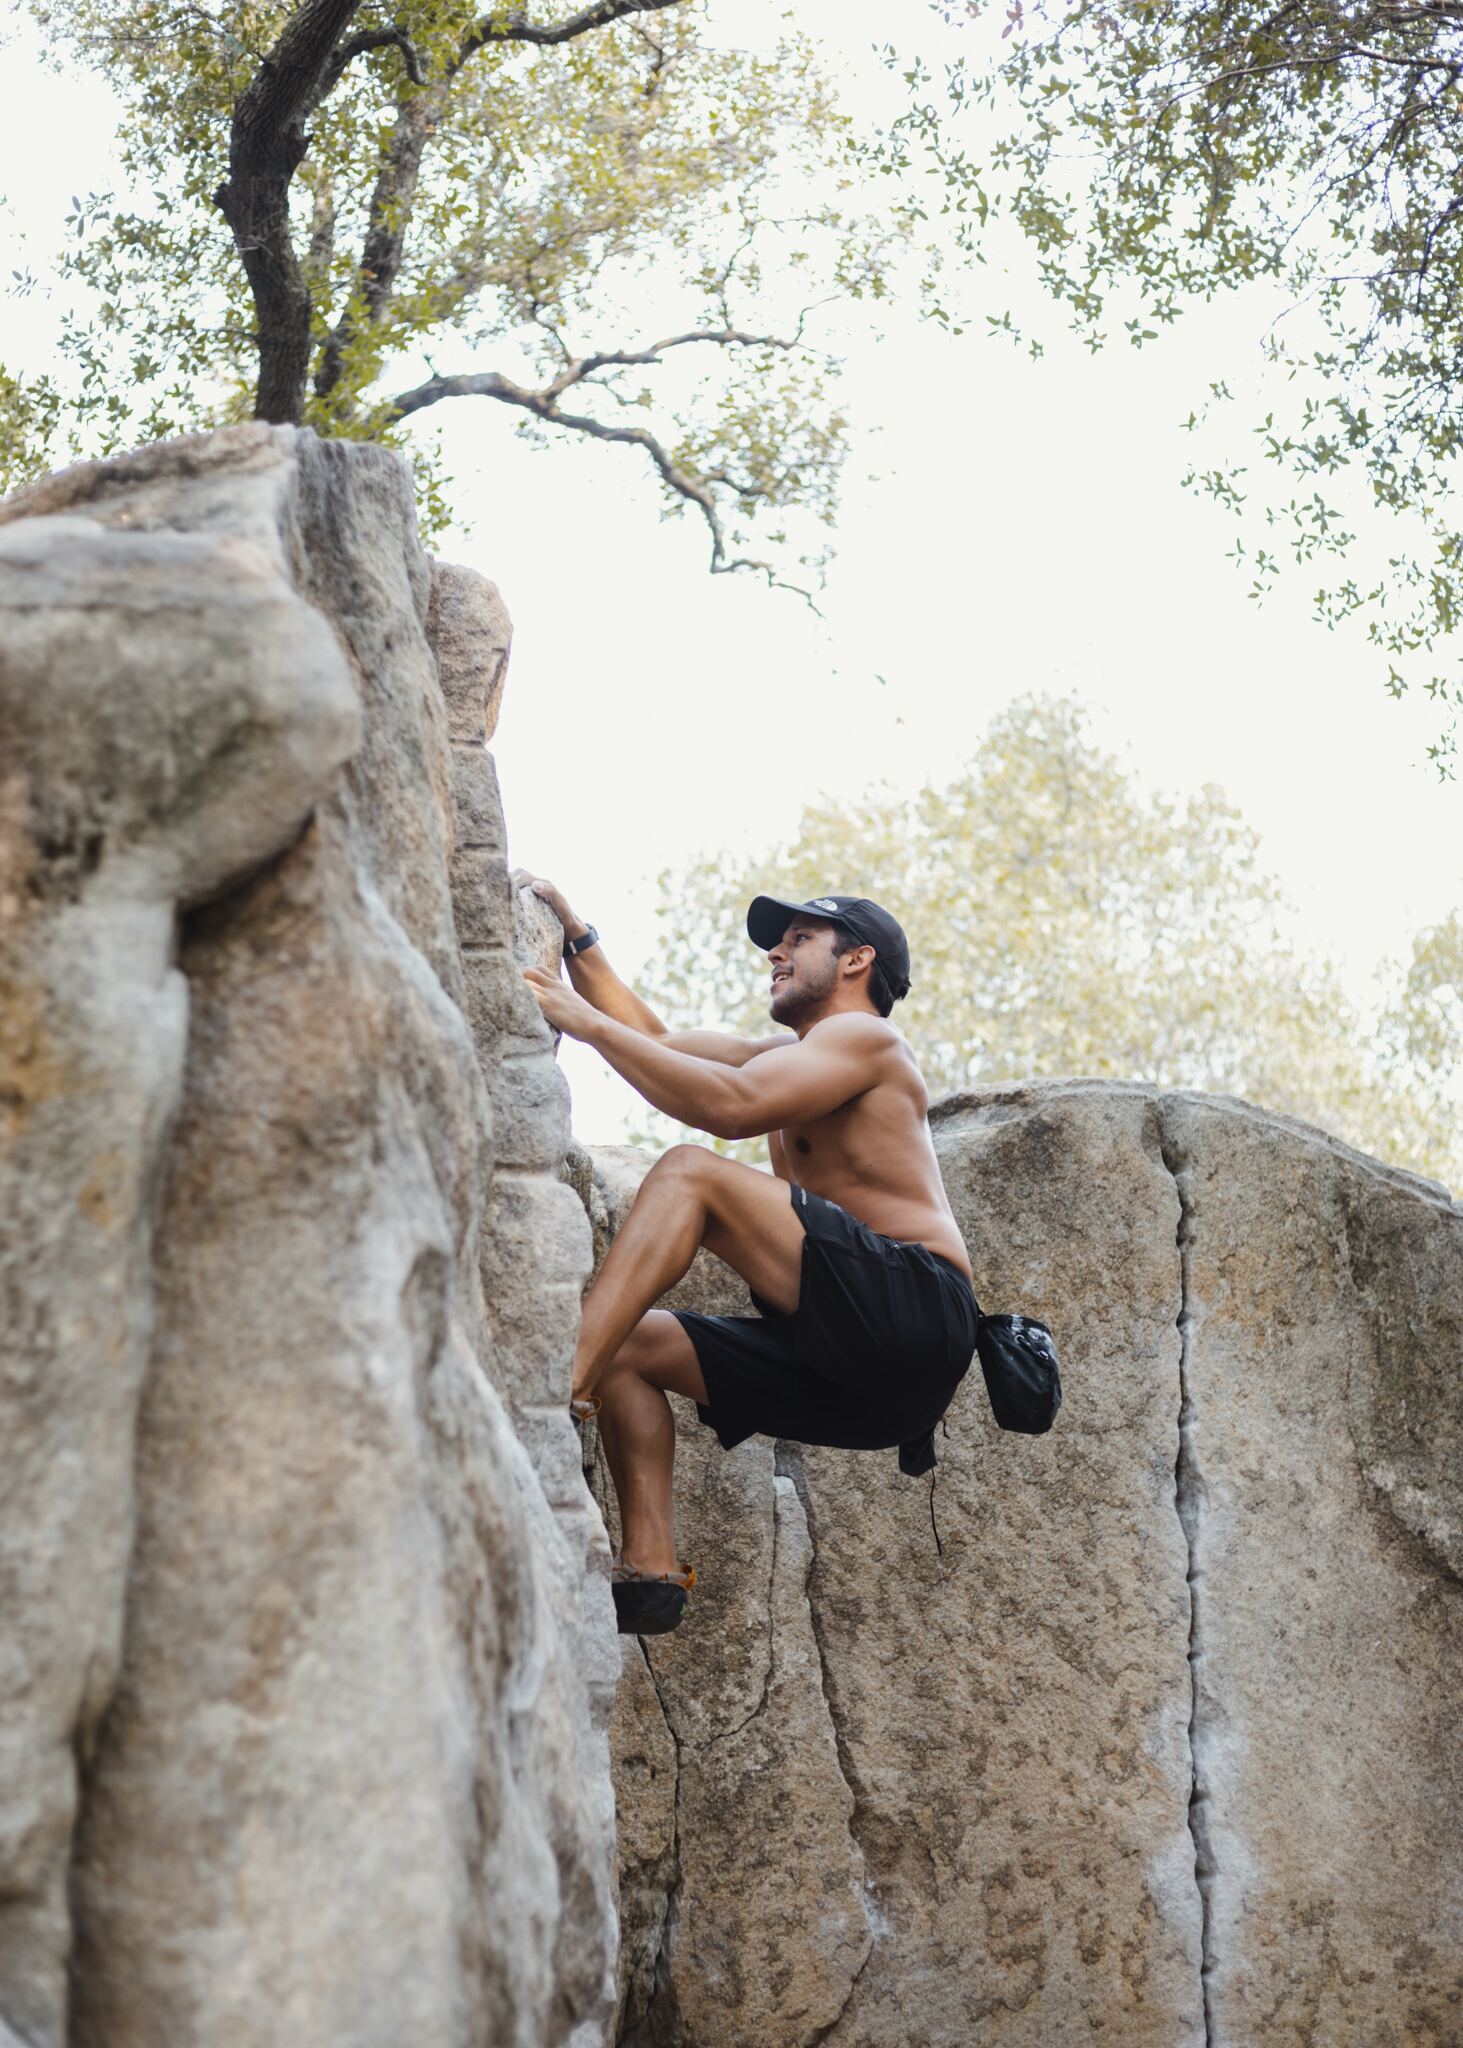 A man engages in the activity of rock climbing, displaying strength and determination.